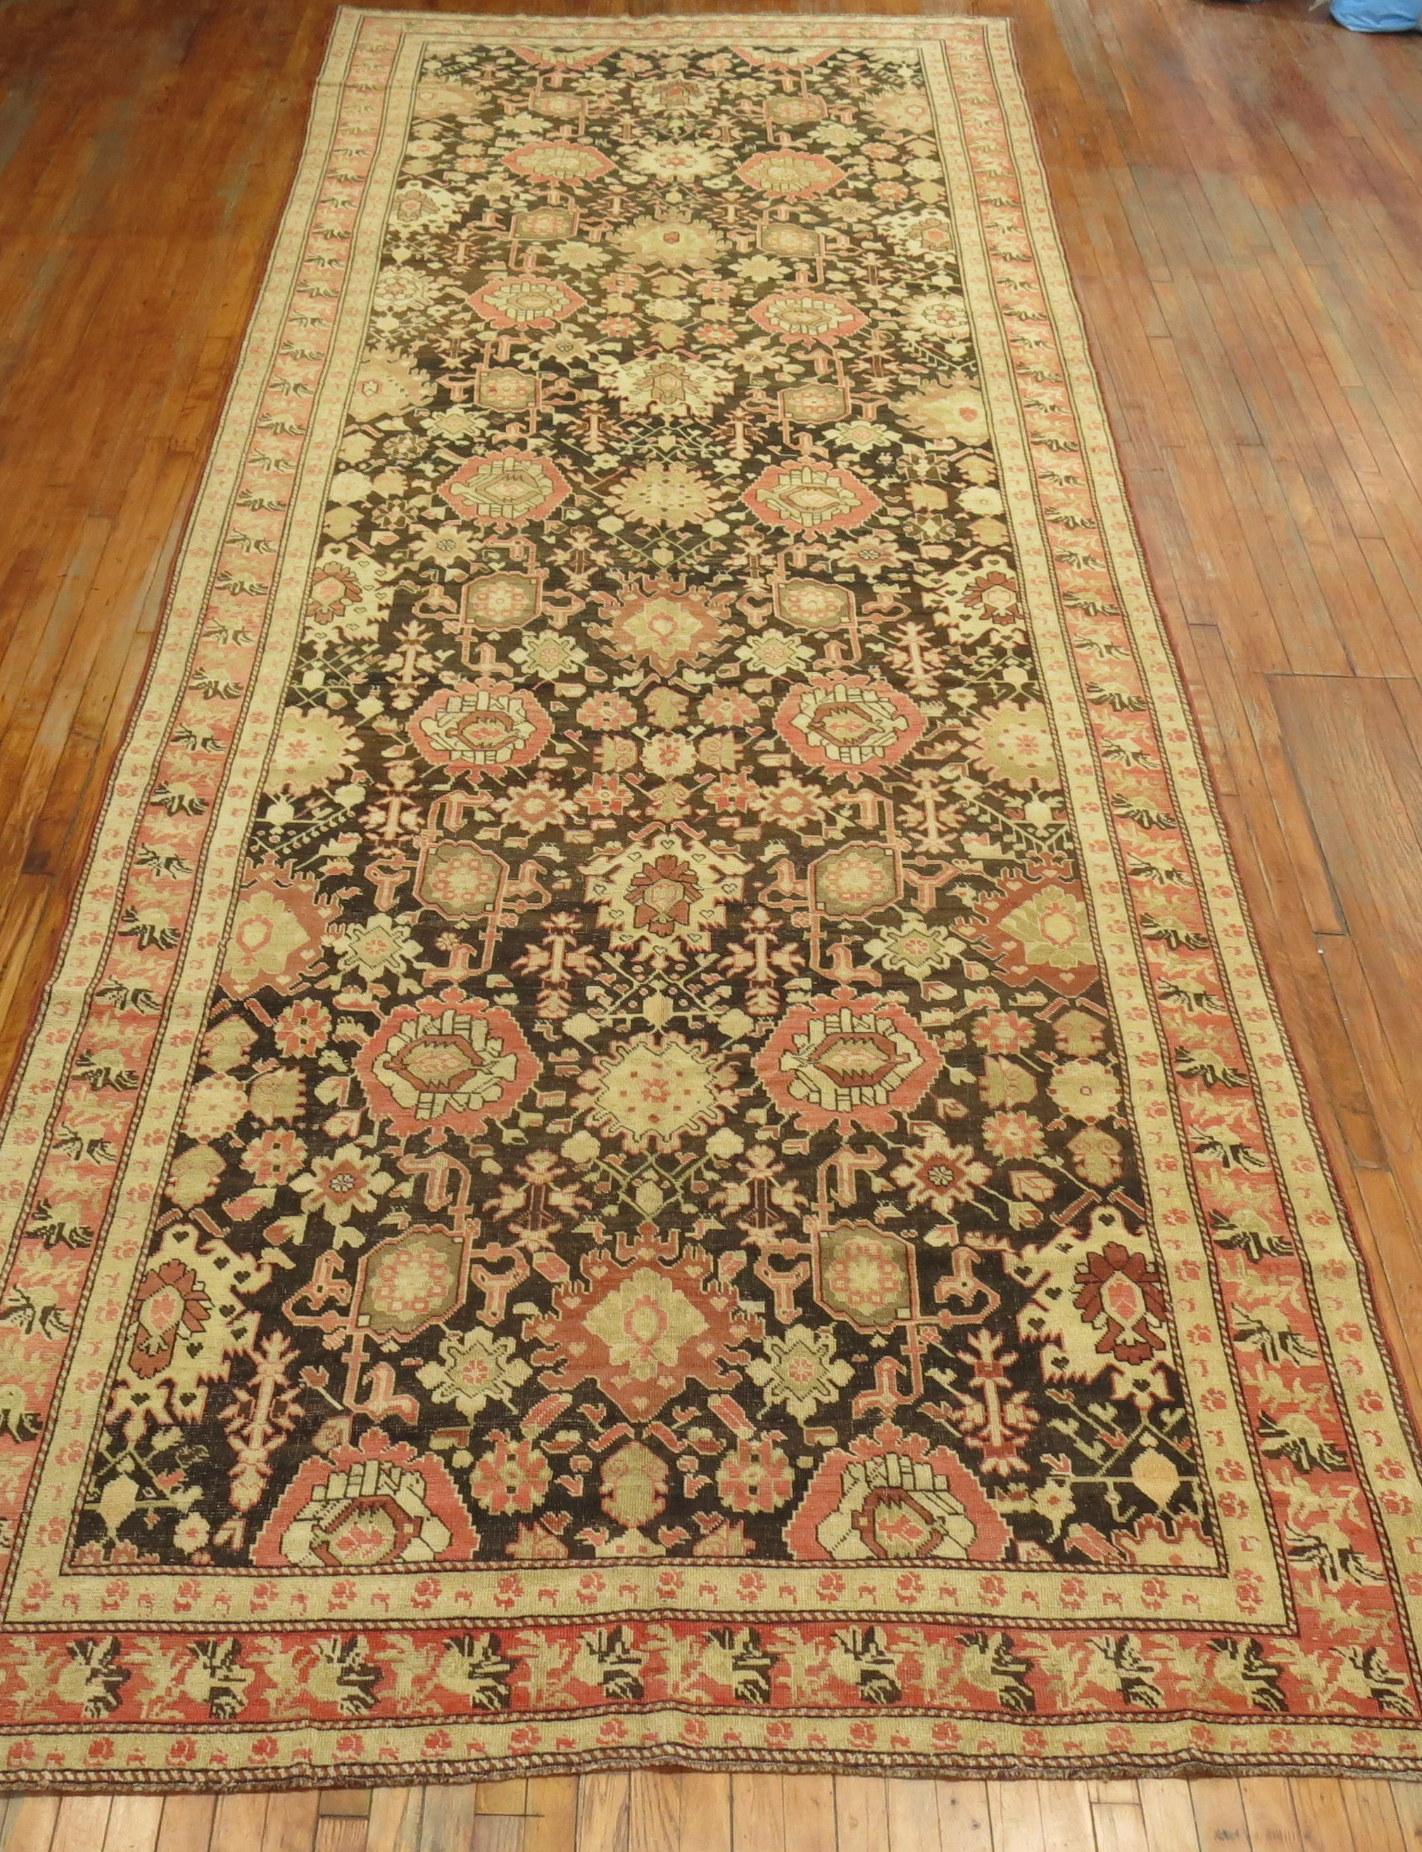 A rare size early 20th century gallery Karabagh rug in predominant soft browns and terracotta accents.

Measures: 6'8